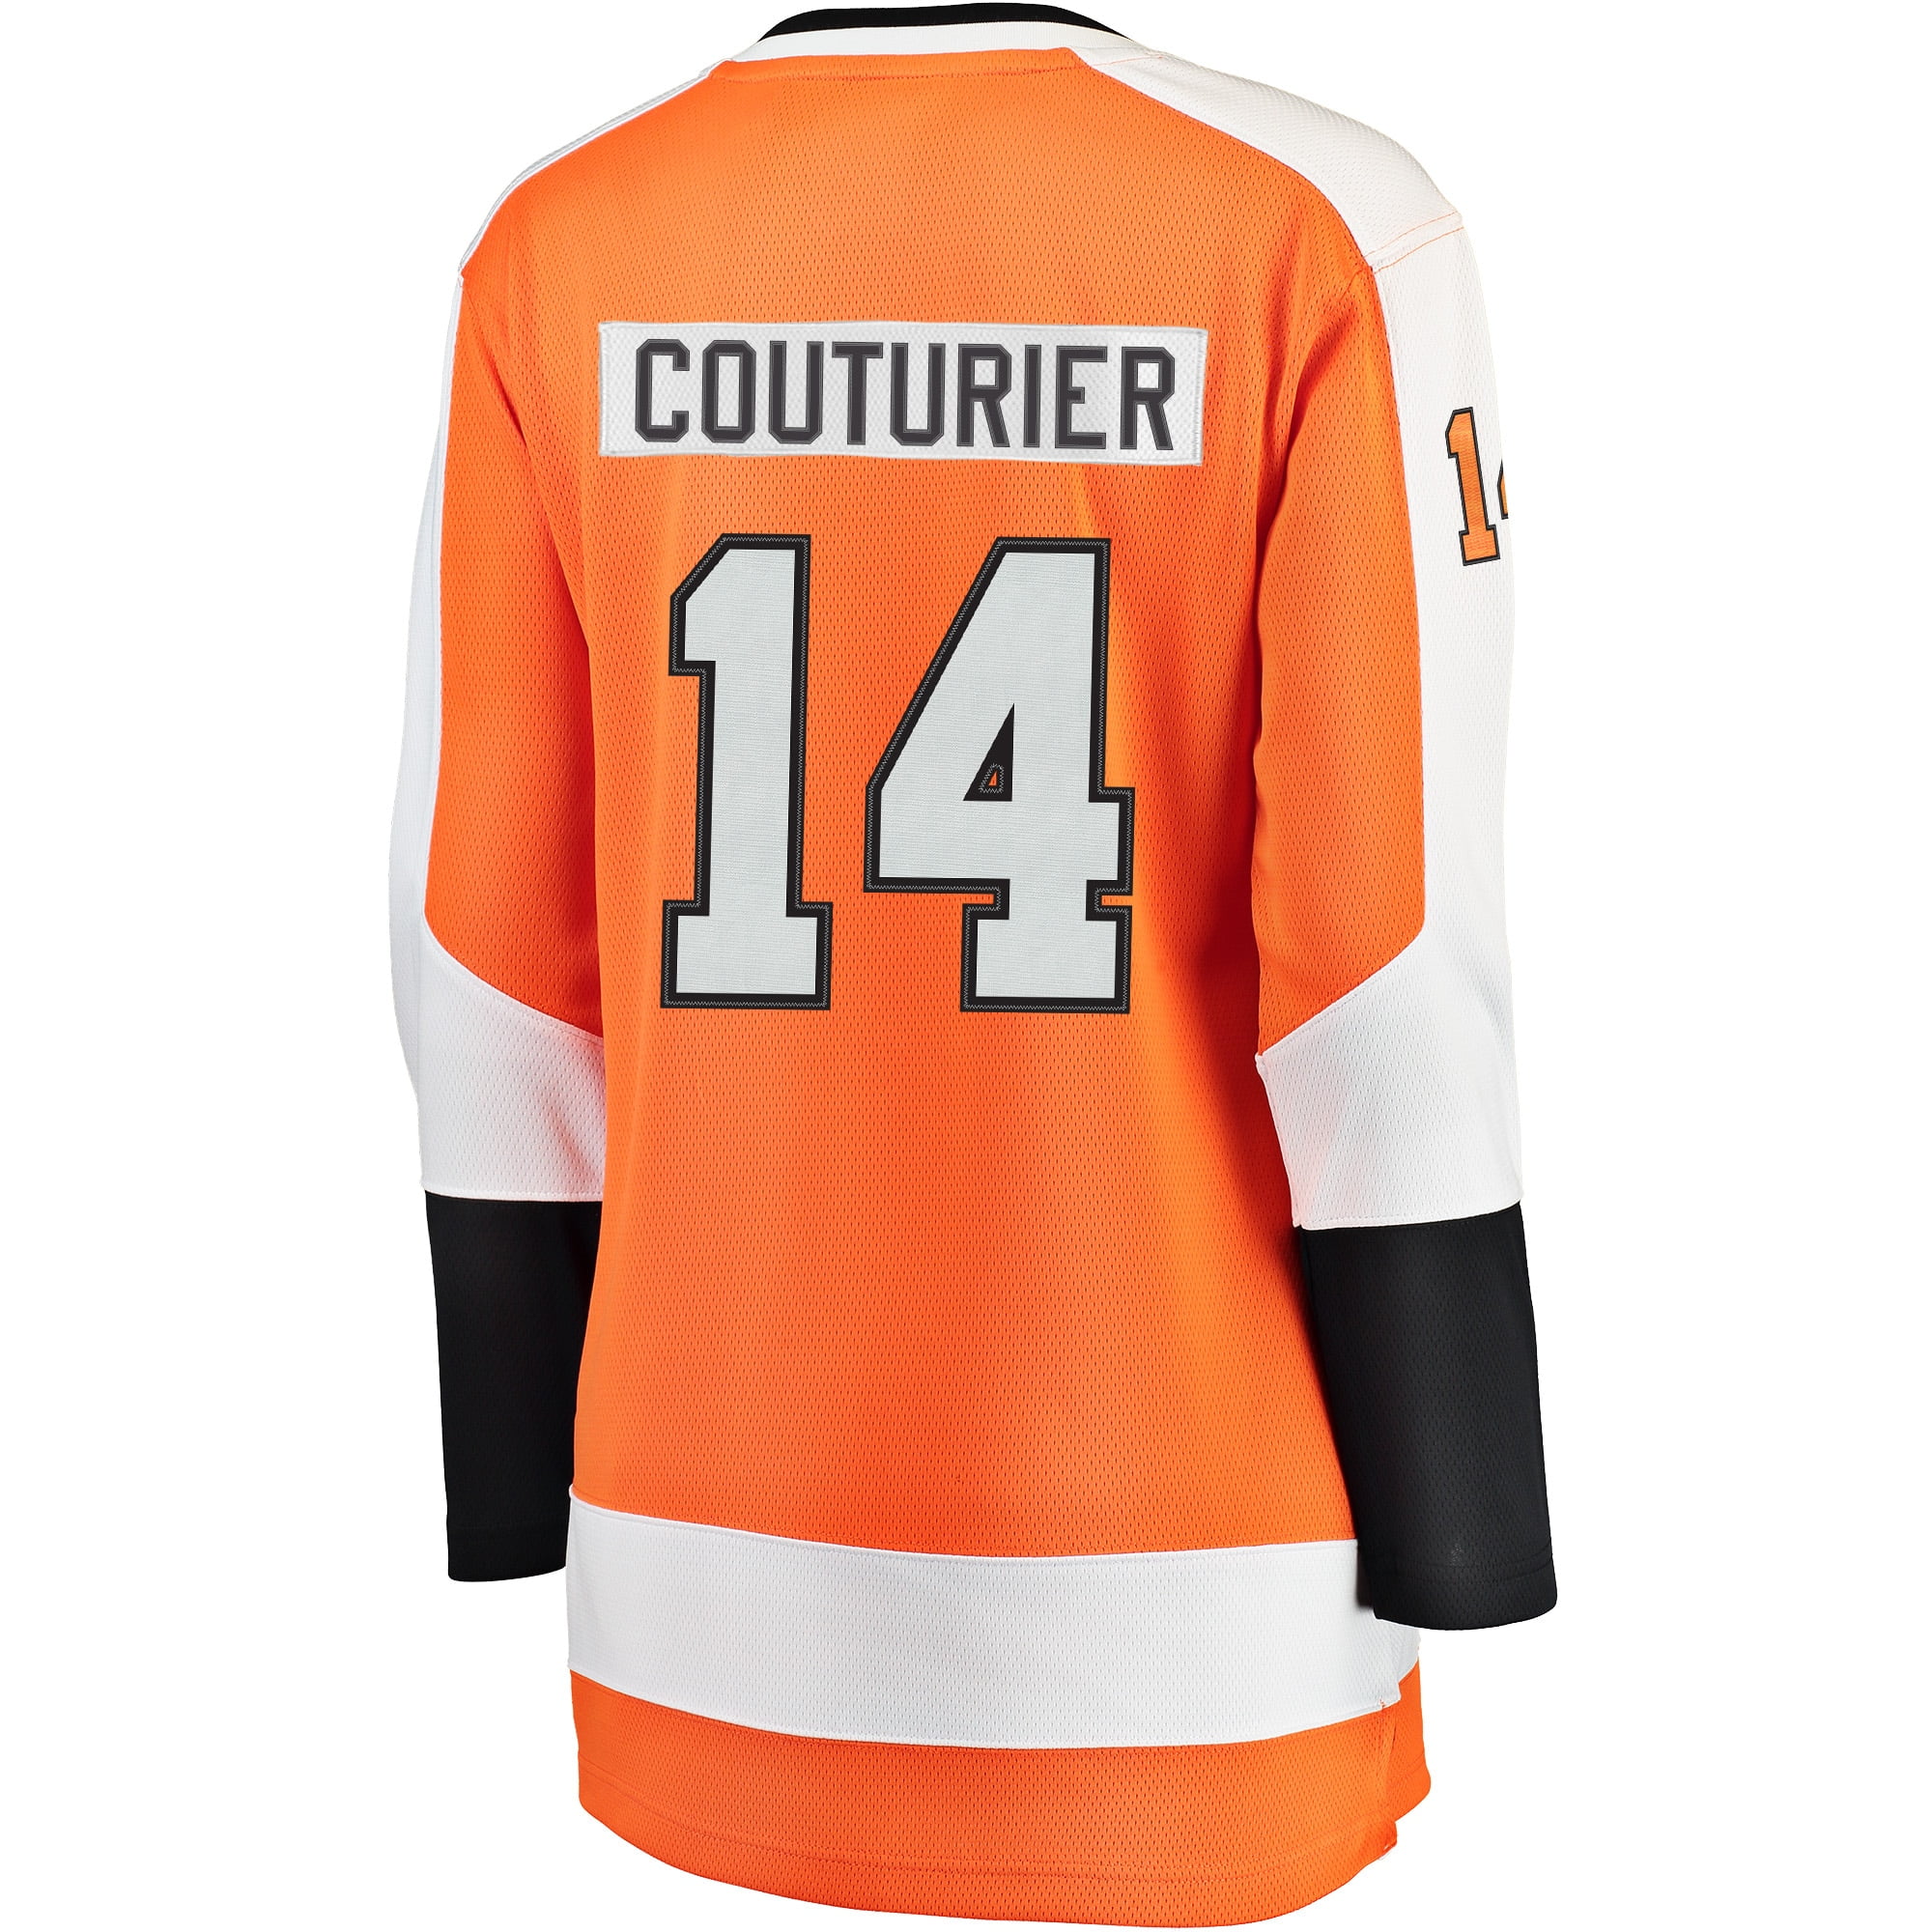 couturier jersey